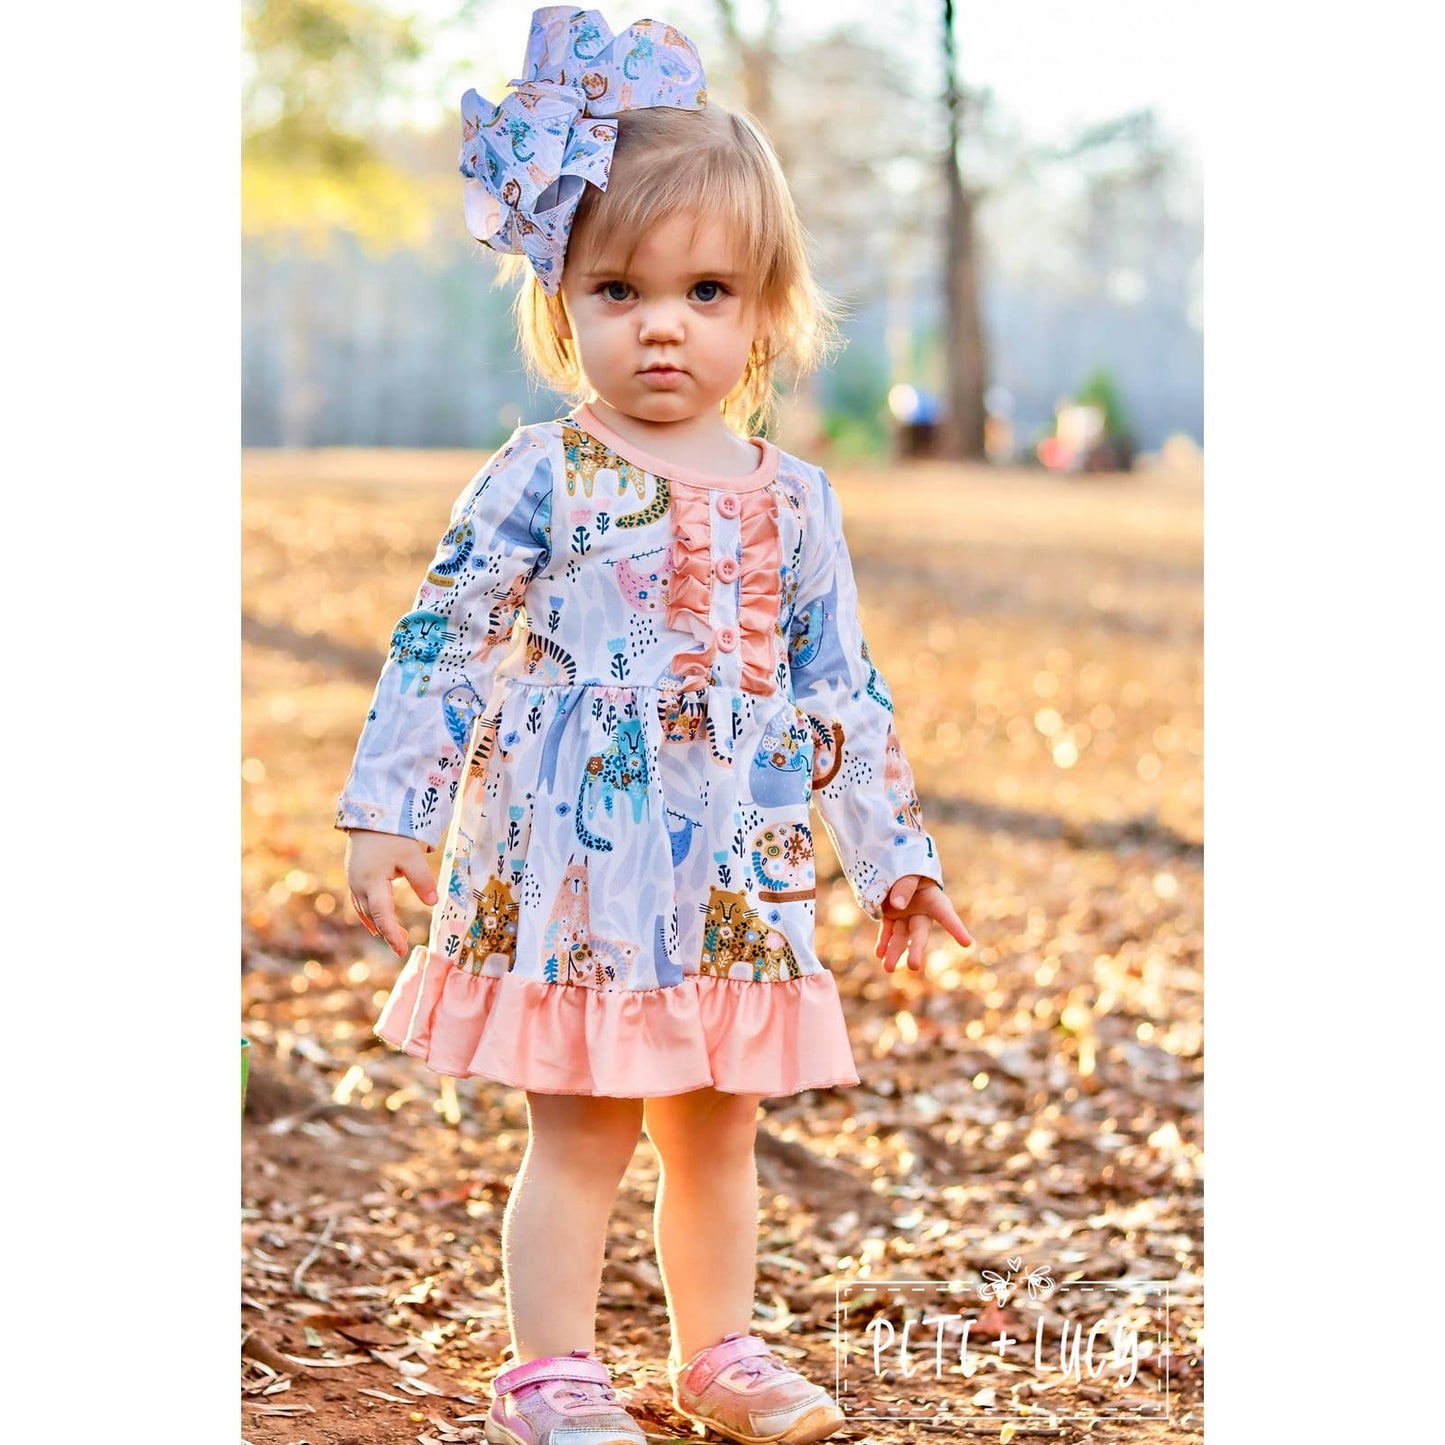 PETE + LUCY Into the Wild Animal Floral Girls Ruffle Dress